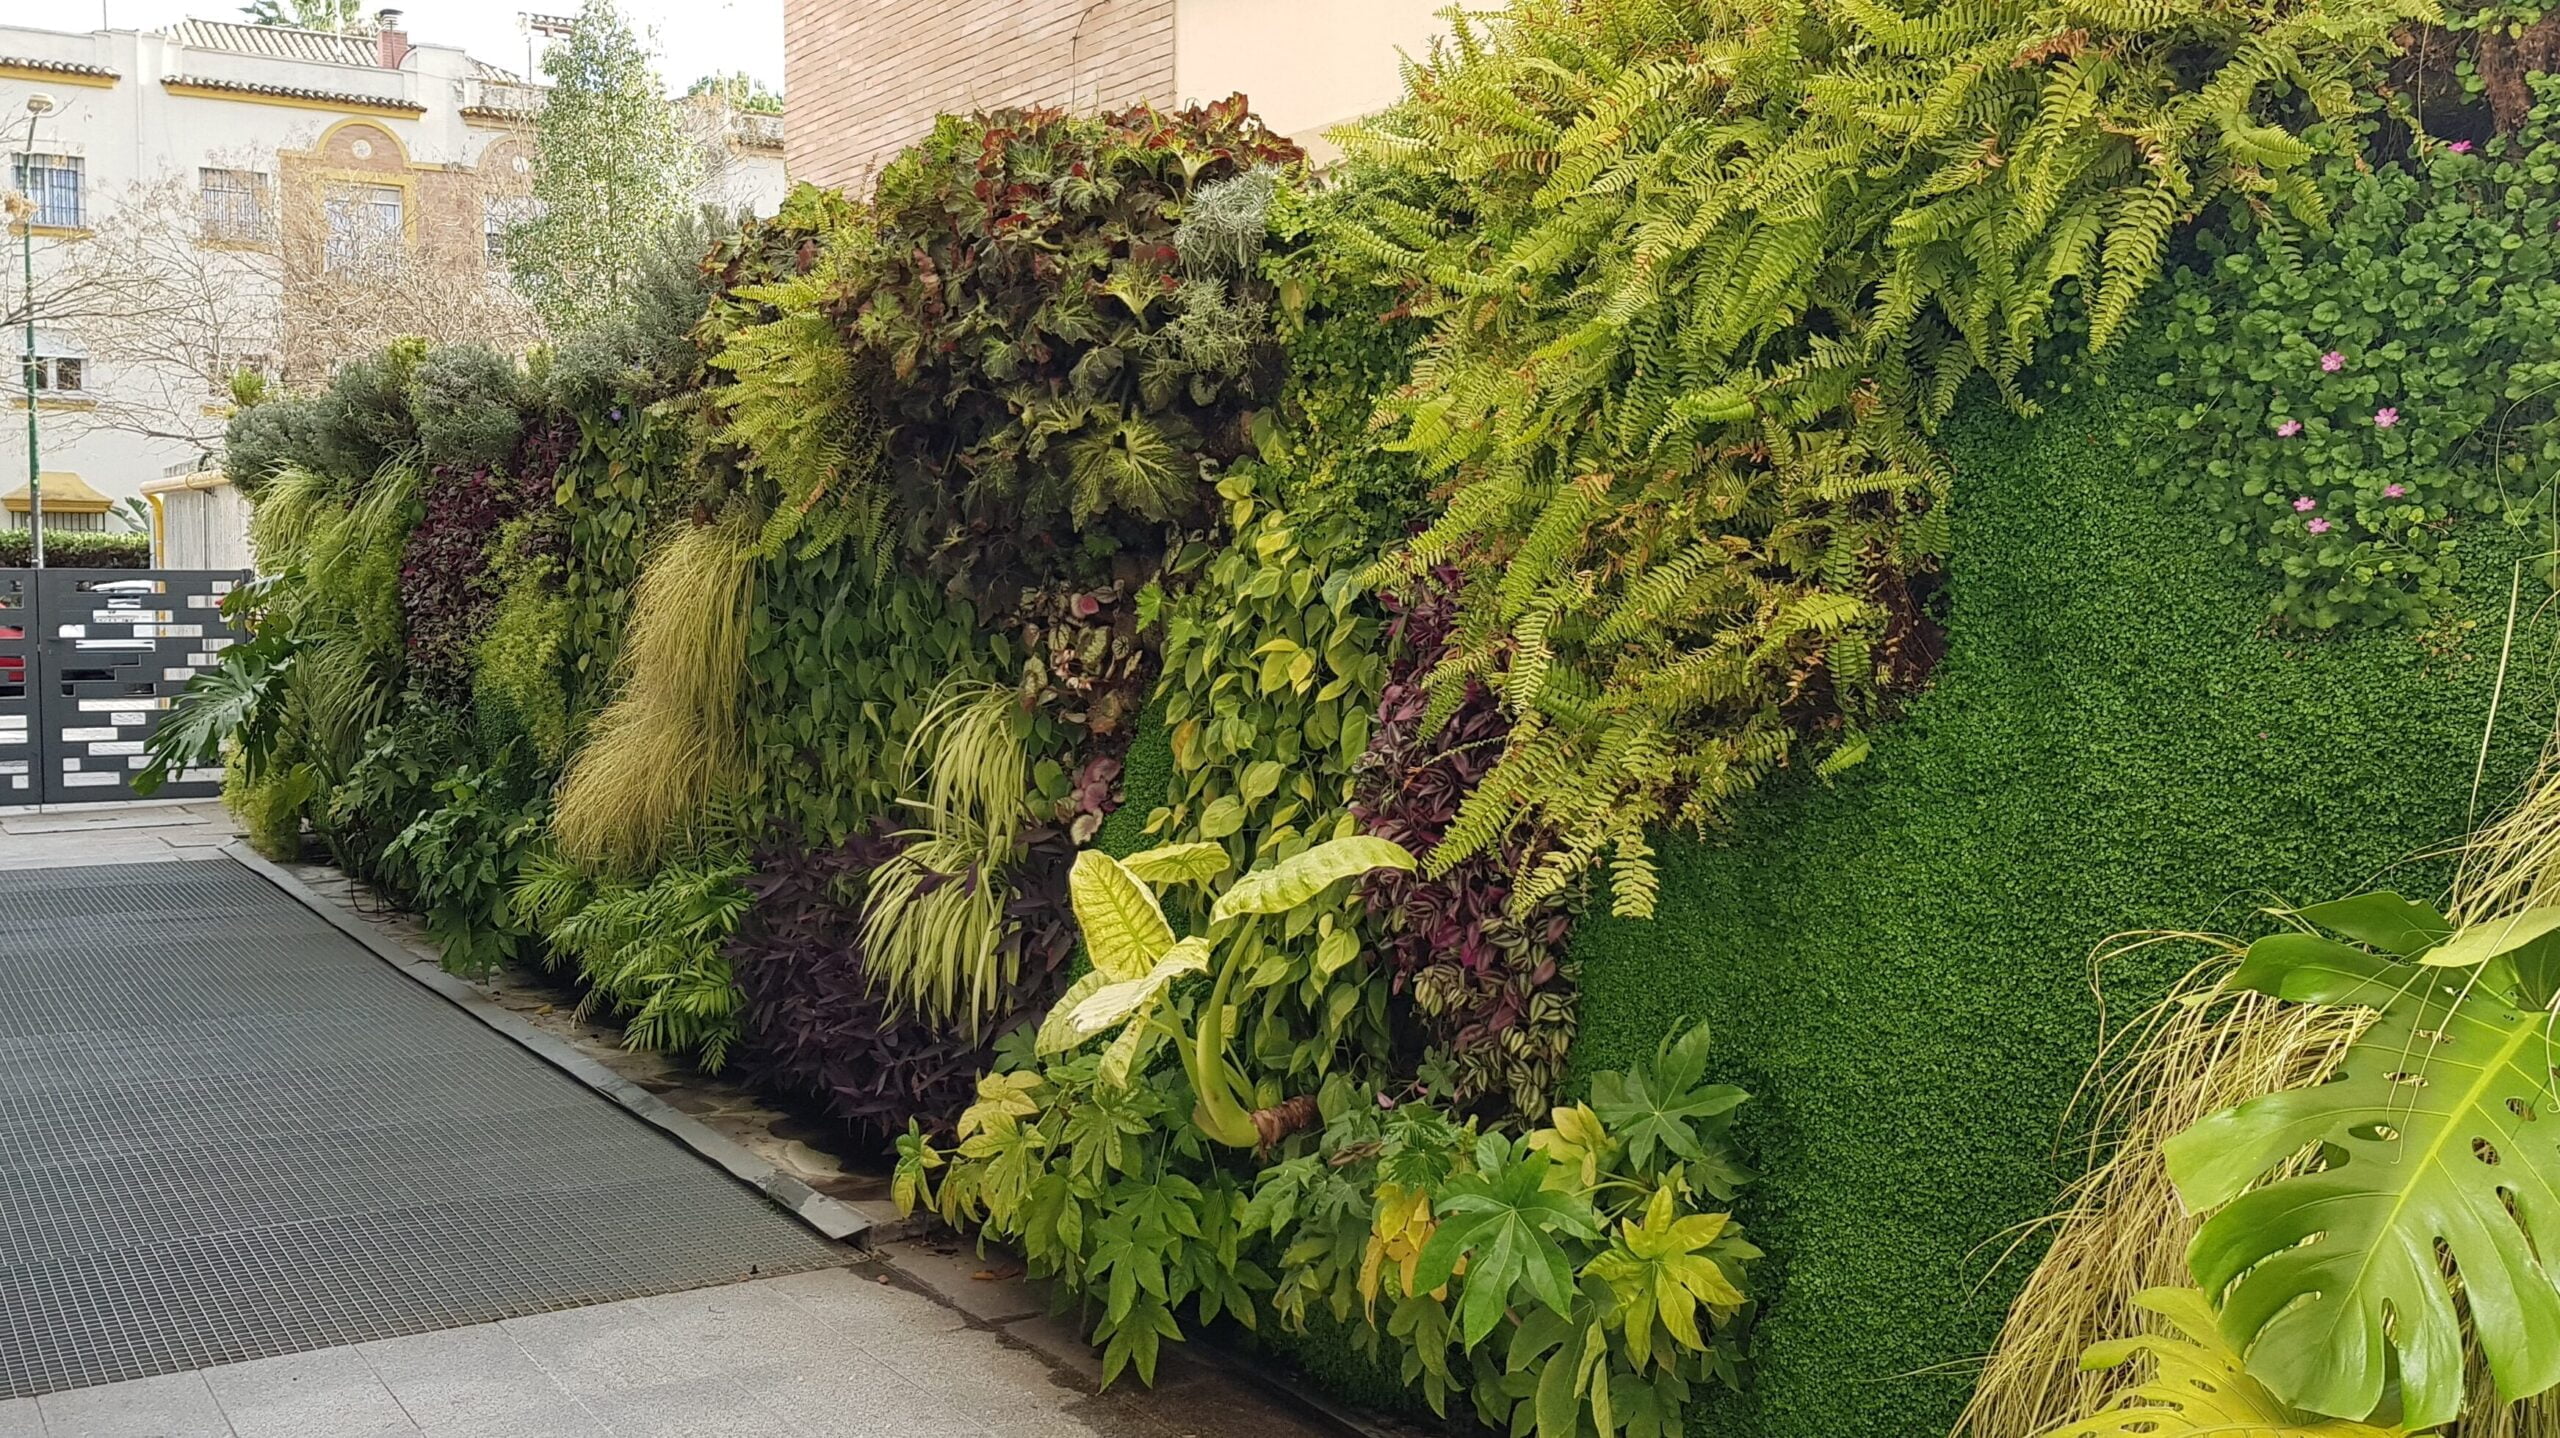 An example of living walls